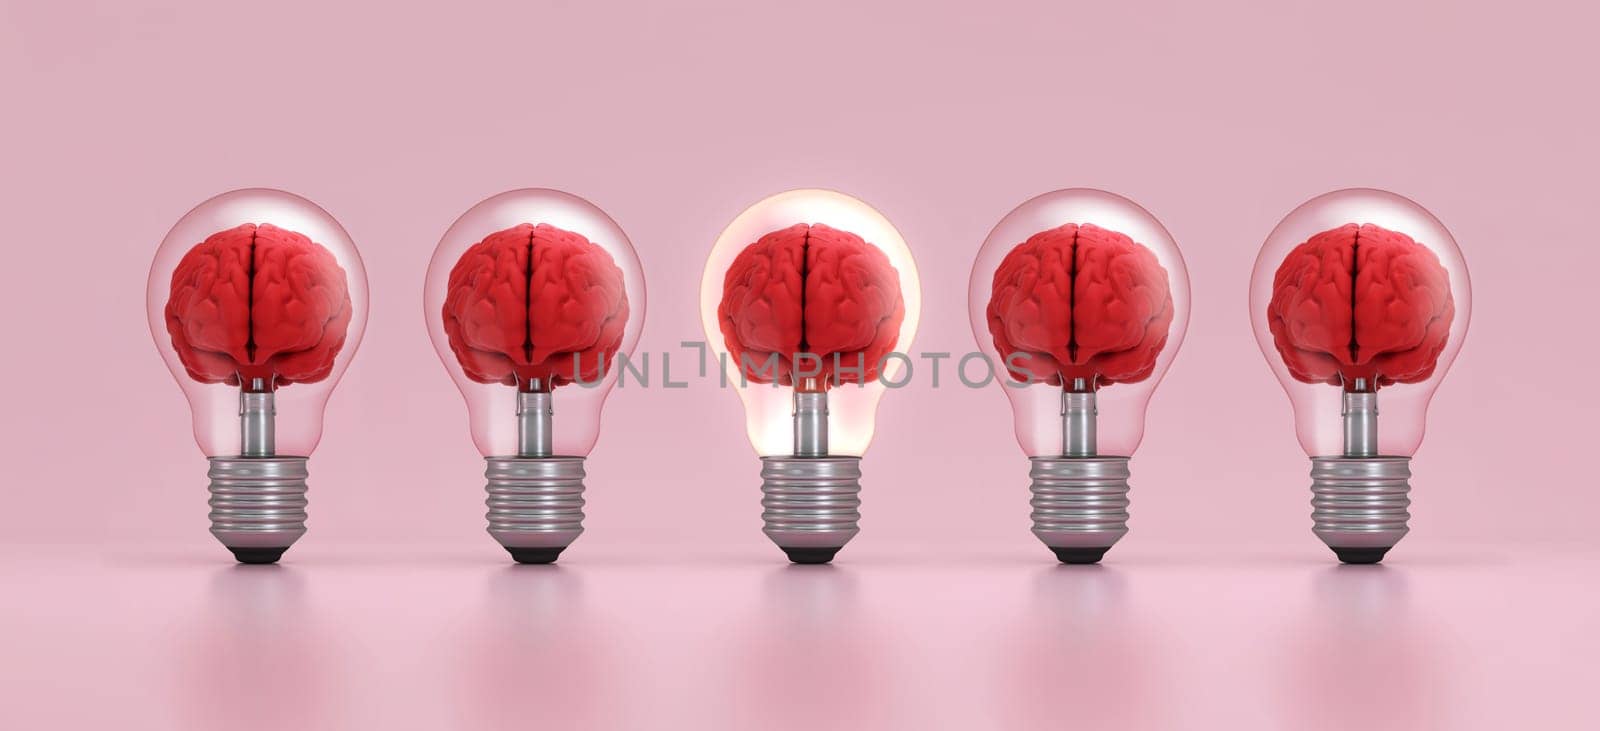 Brain inside a light bulb illuminated standing out from the crowd on pink background. Concept of inspiration, creativity, idea, education, innovation. 3D rendering.